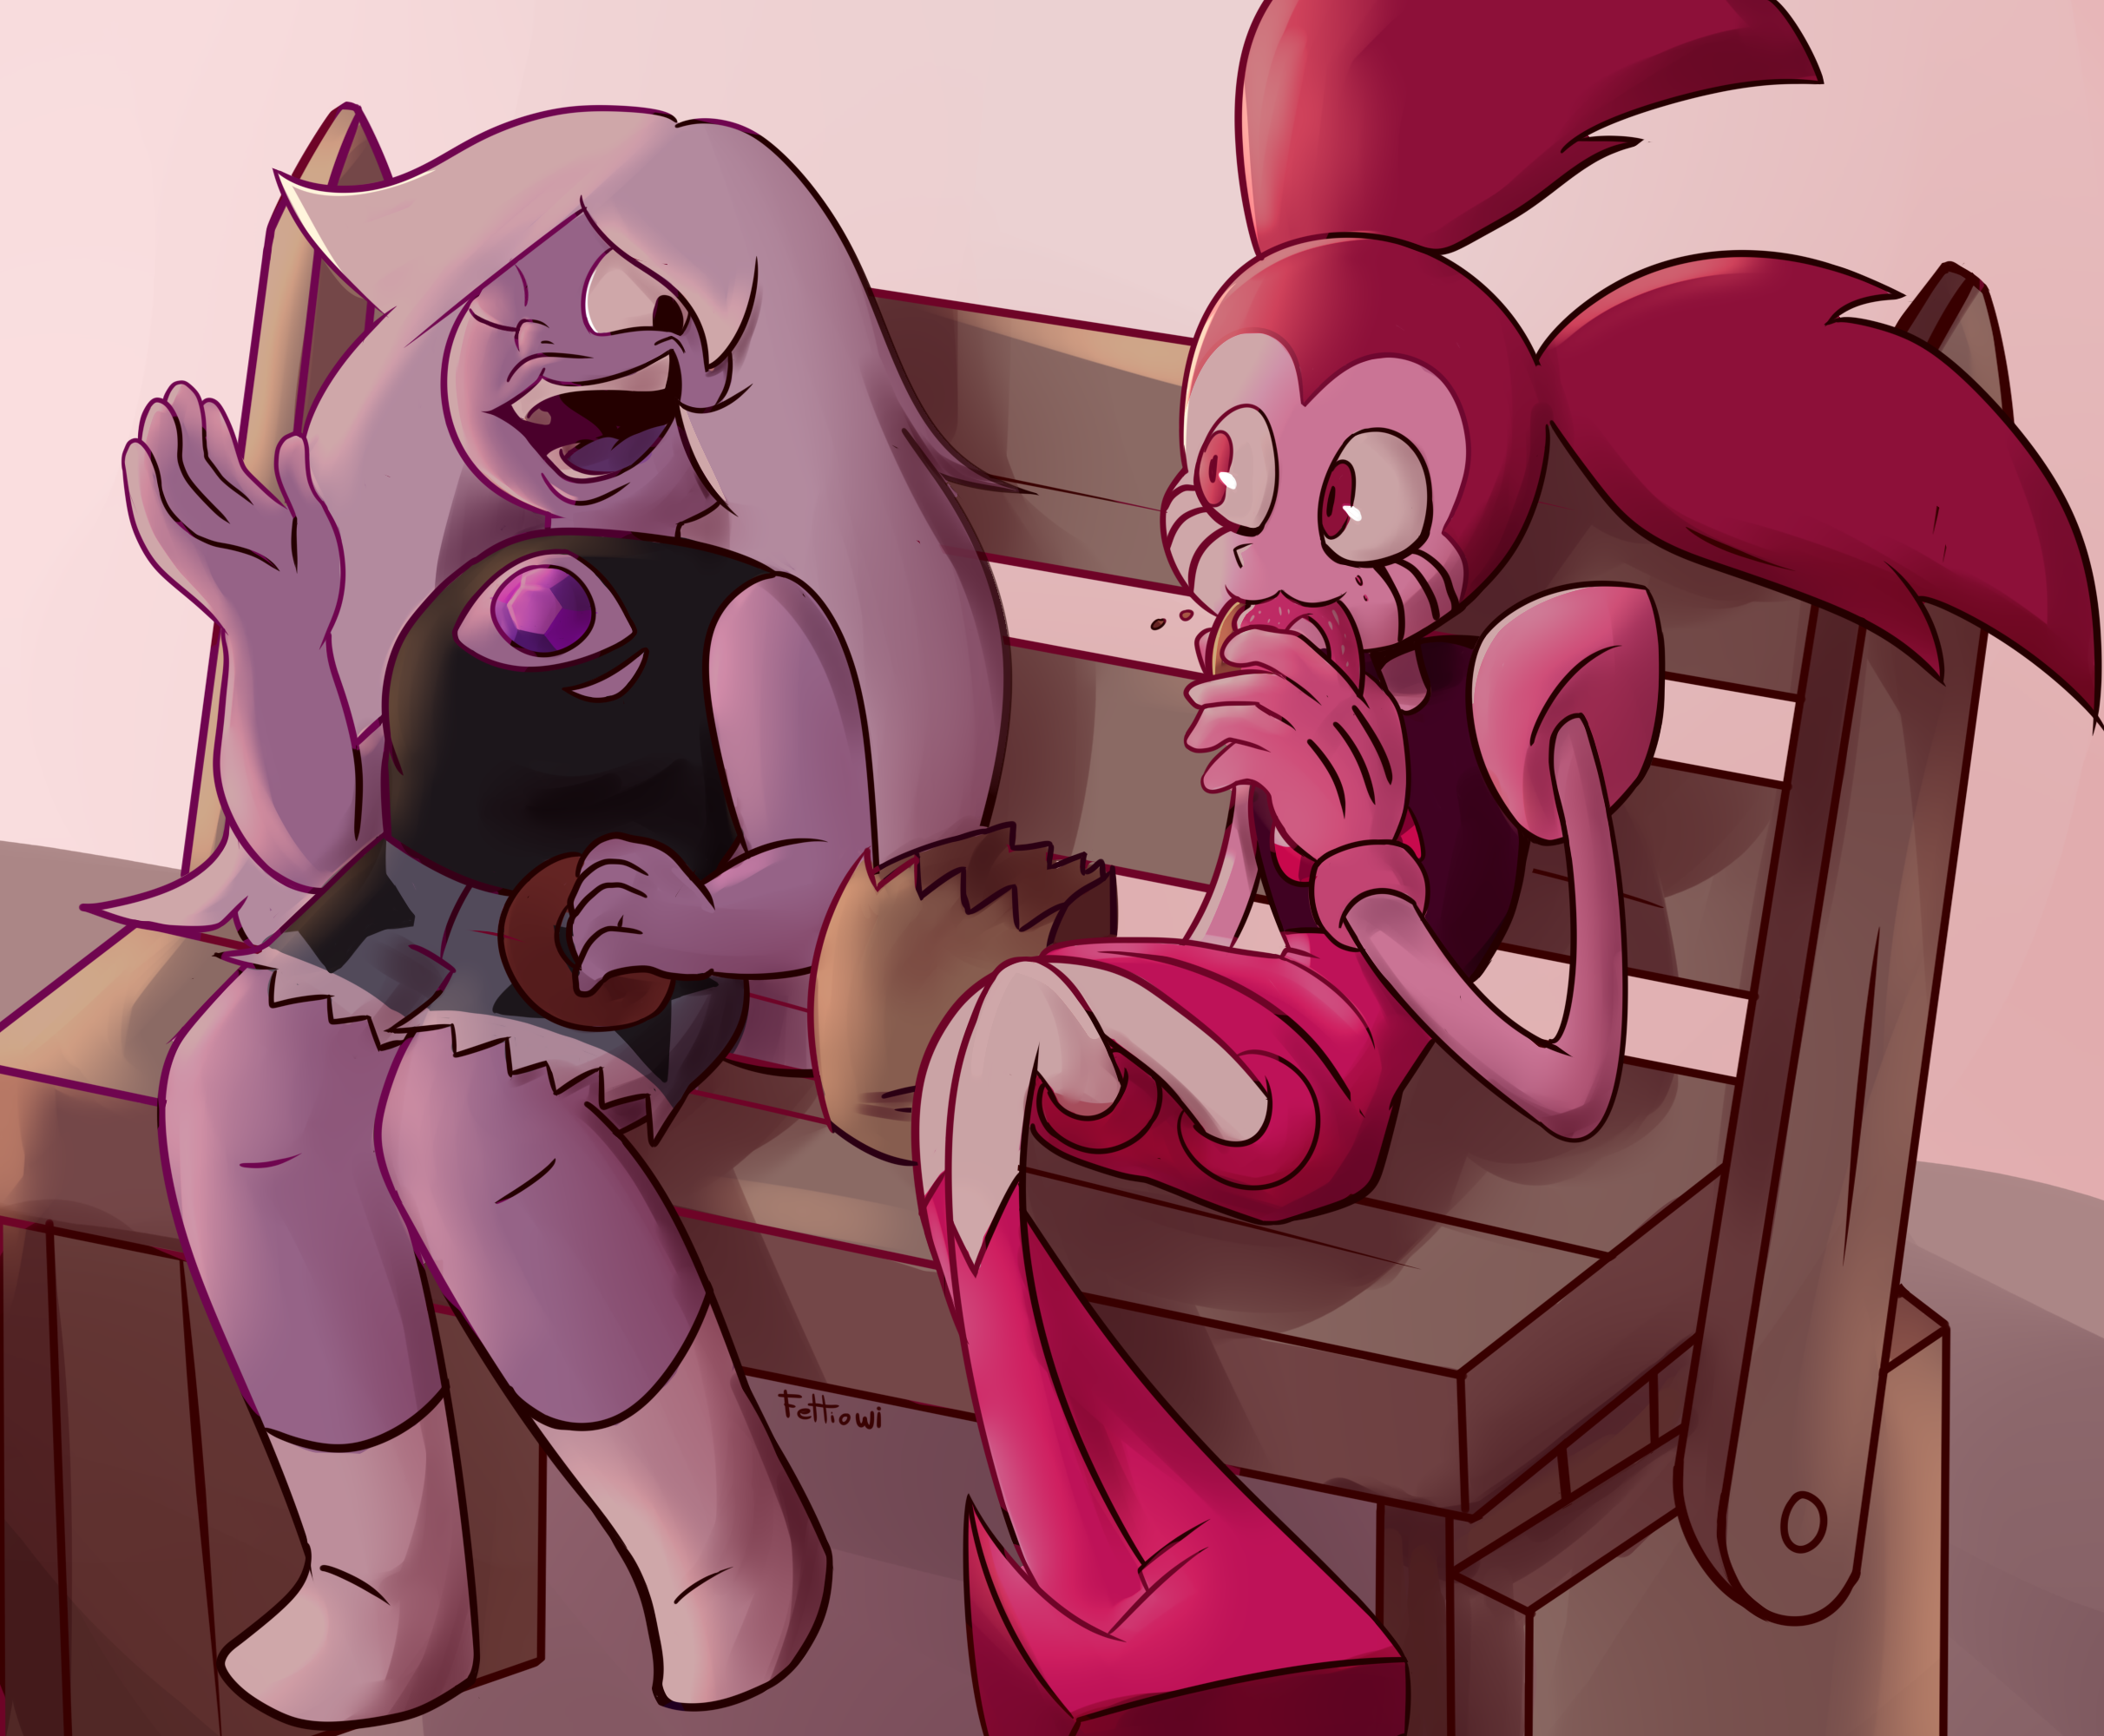 Continuing the "spinel interacting with other gems" thing, or as ...